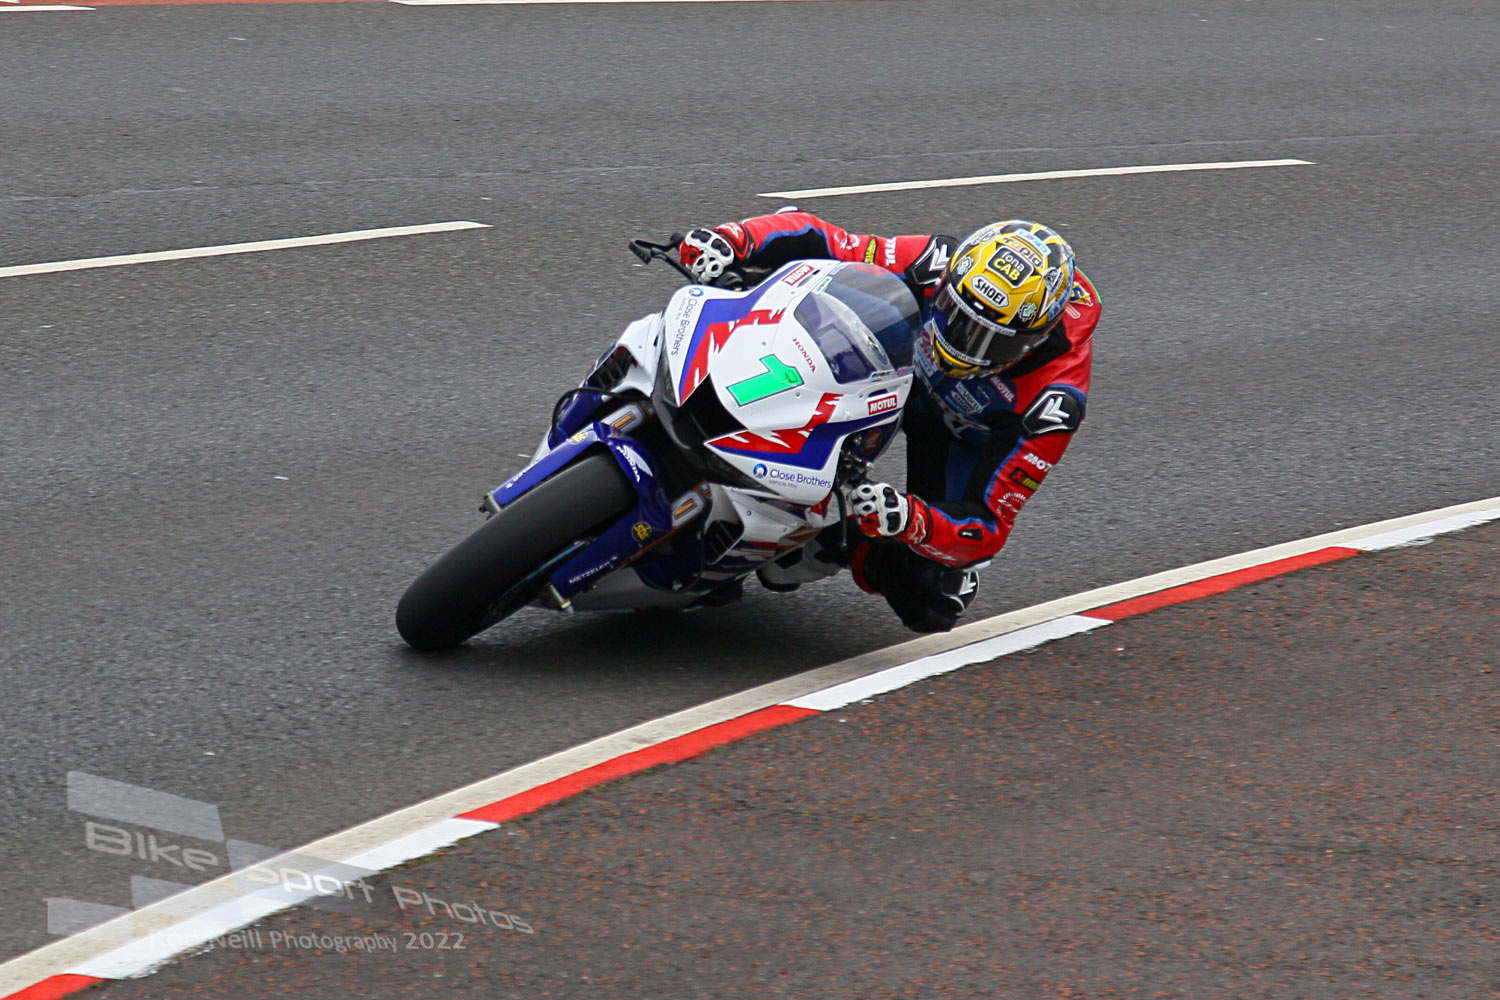 NW200: Irwin Acquires Superbike Pole, Sets Record Qualifying Time